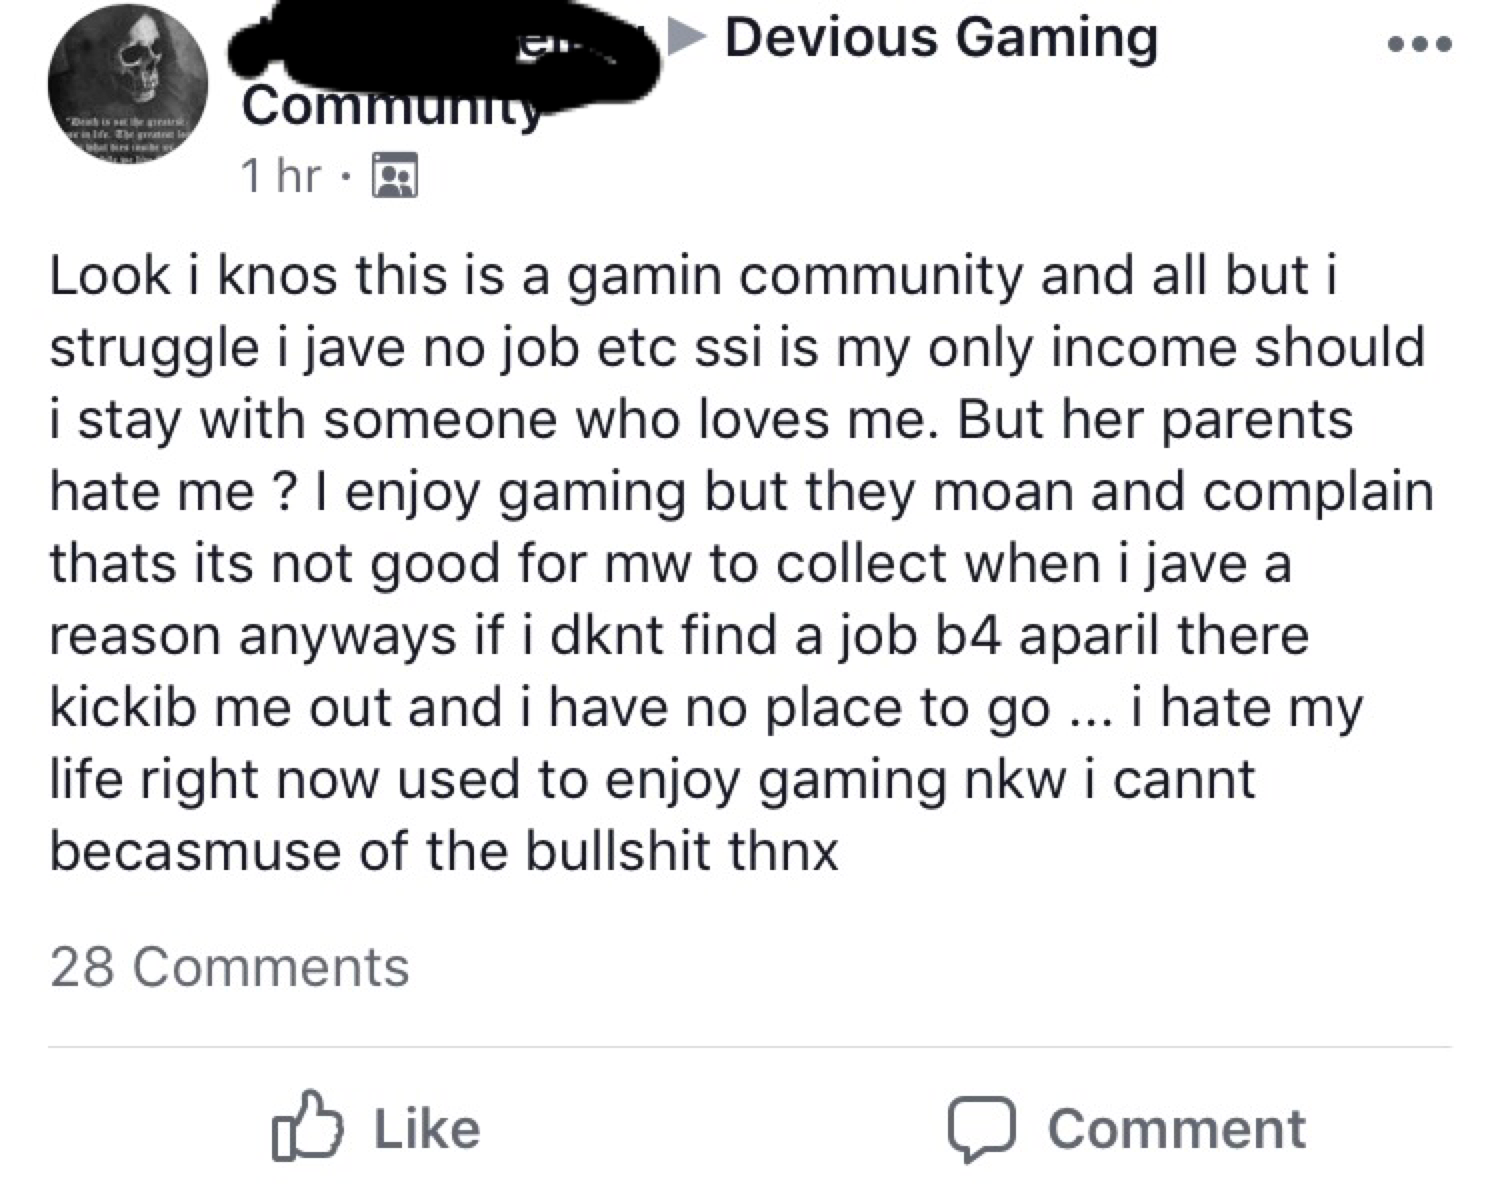 angle - Devious Gaming Community 1 hr. Look i knos this is a gamin community and all but i struggle i jave no job etc ssi is my only income should i stay with someone who loves me. But her parents hate me ? I enjoy gaming but they moan and complain thats 